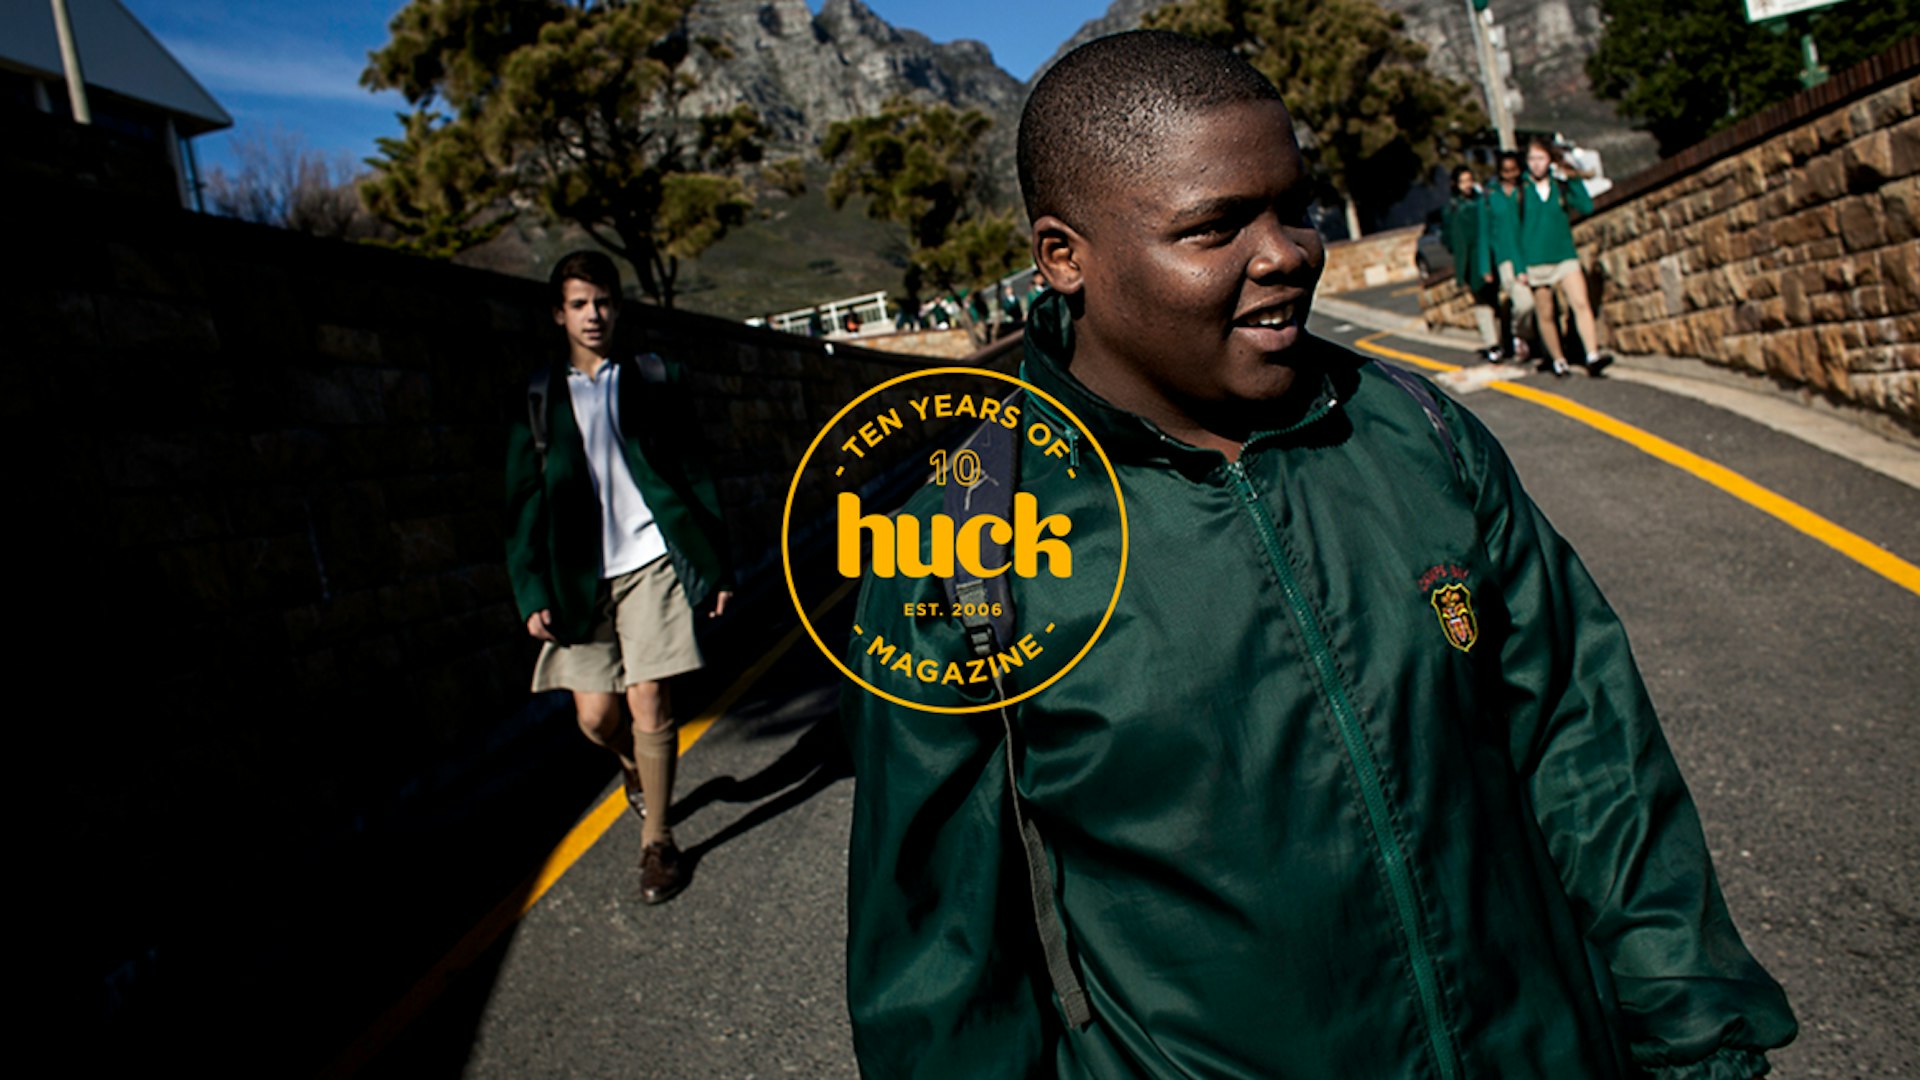 Meet the South African activists fighting for equal education